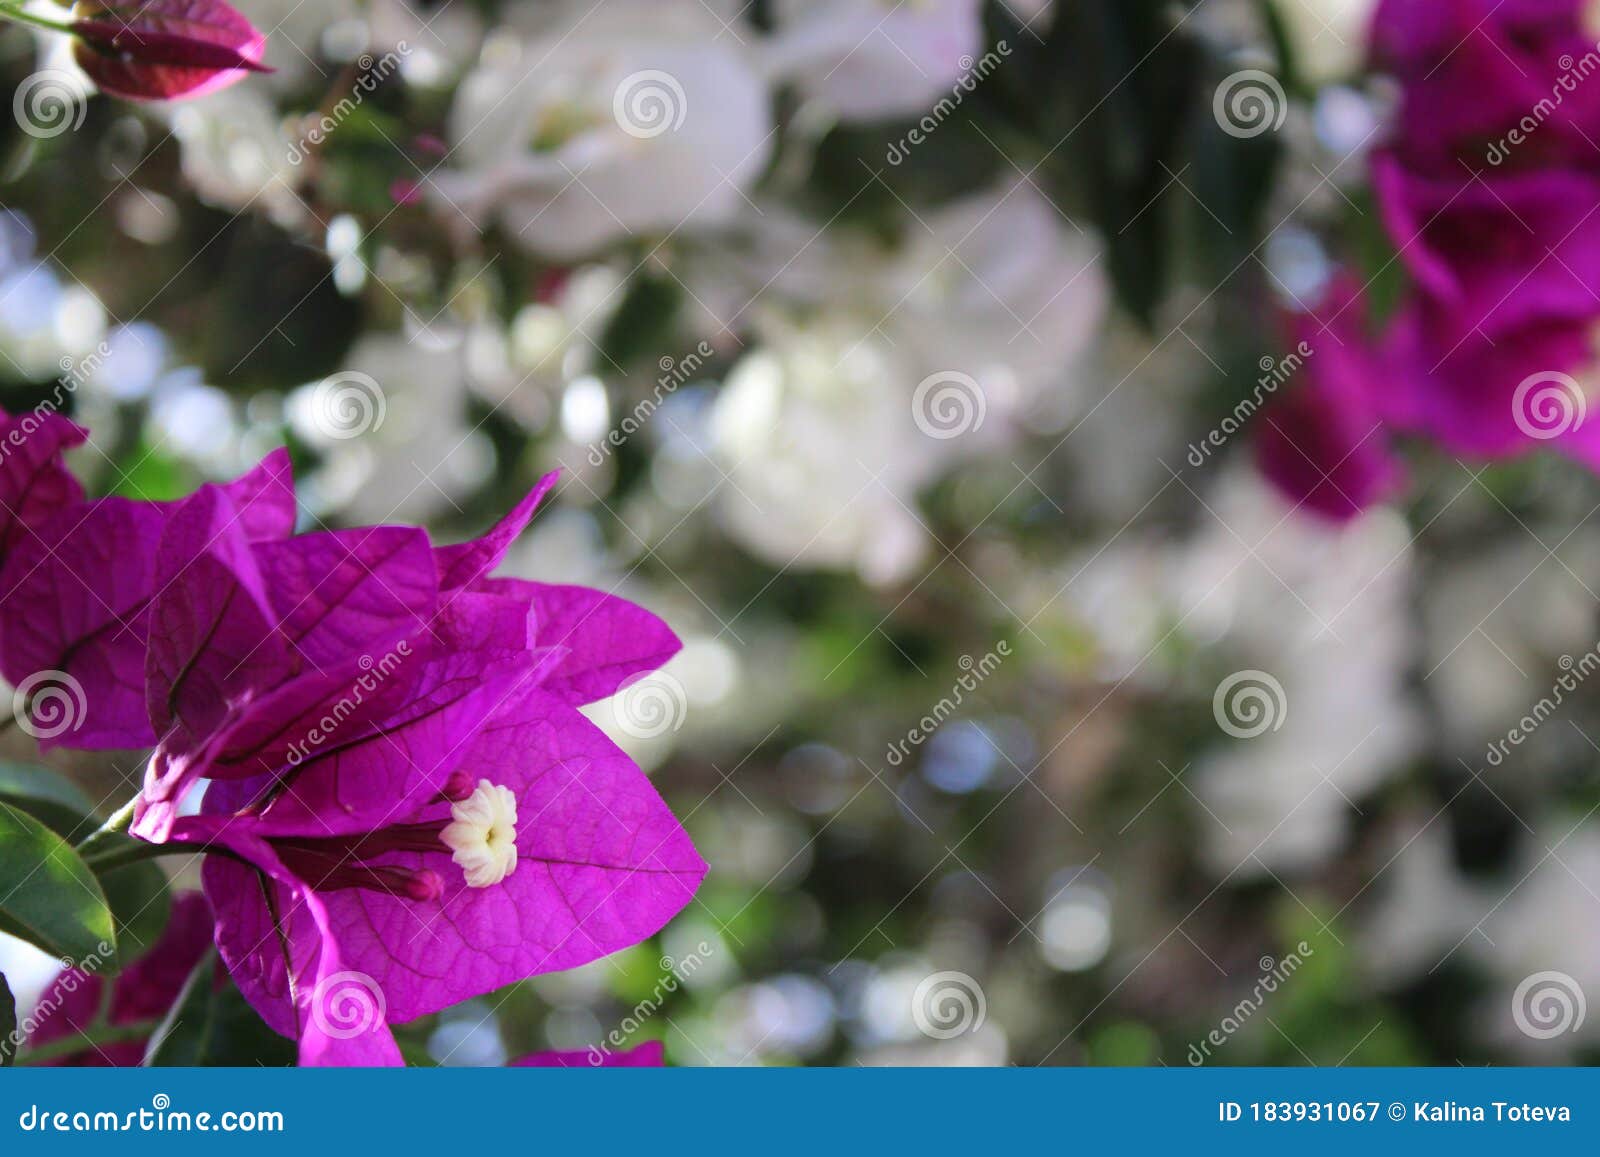 violet bougainvillea, touch of spring